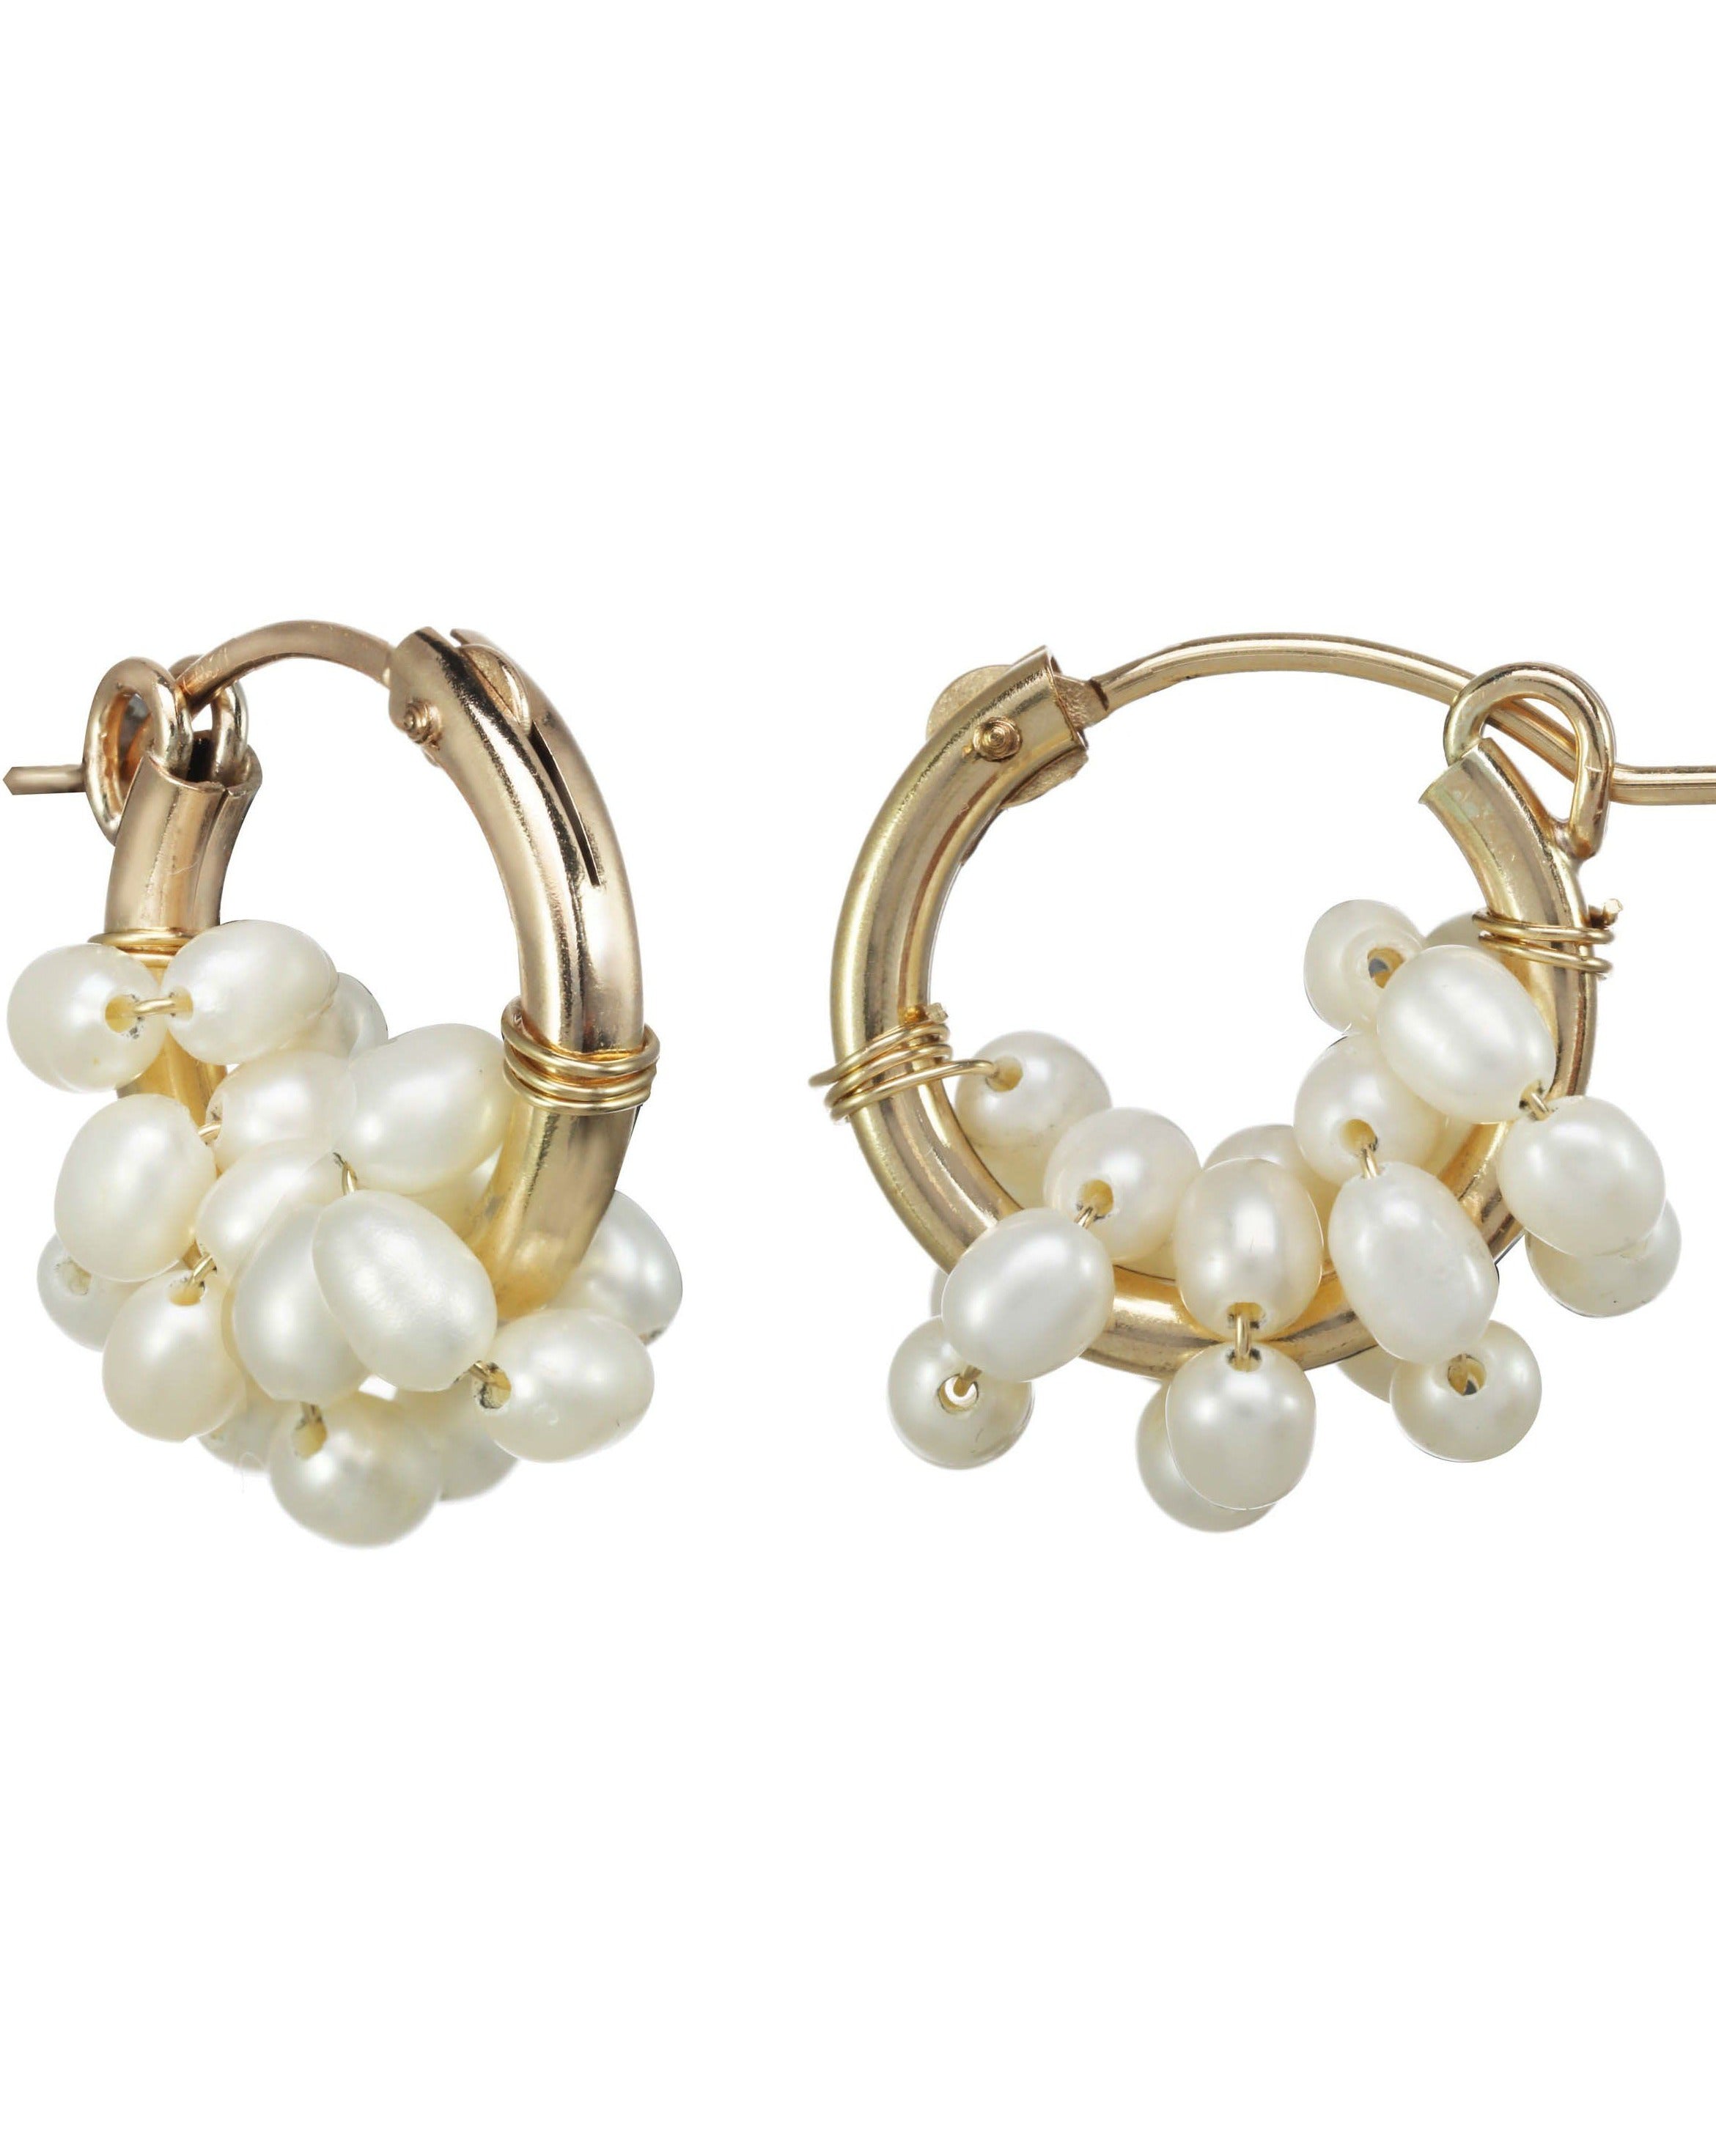 Areese Hoop Earrings by KOZAKH. 15mm hoop earrings with snap closure, crafted in 14K Gold Filled and embellished with 5mm white Rice Pearls.